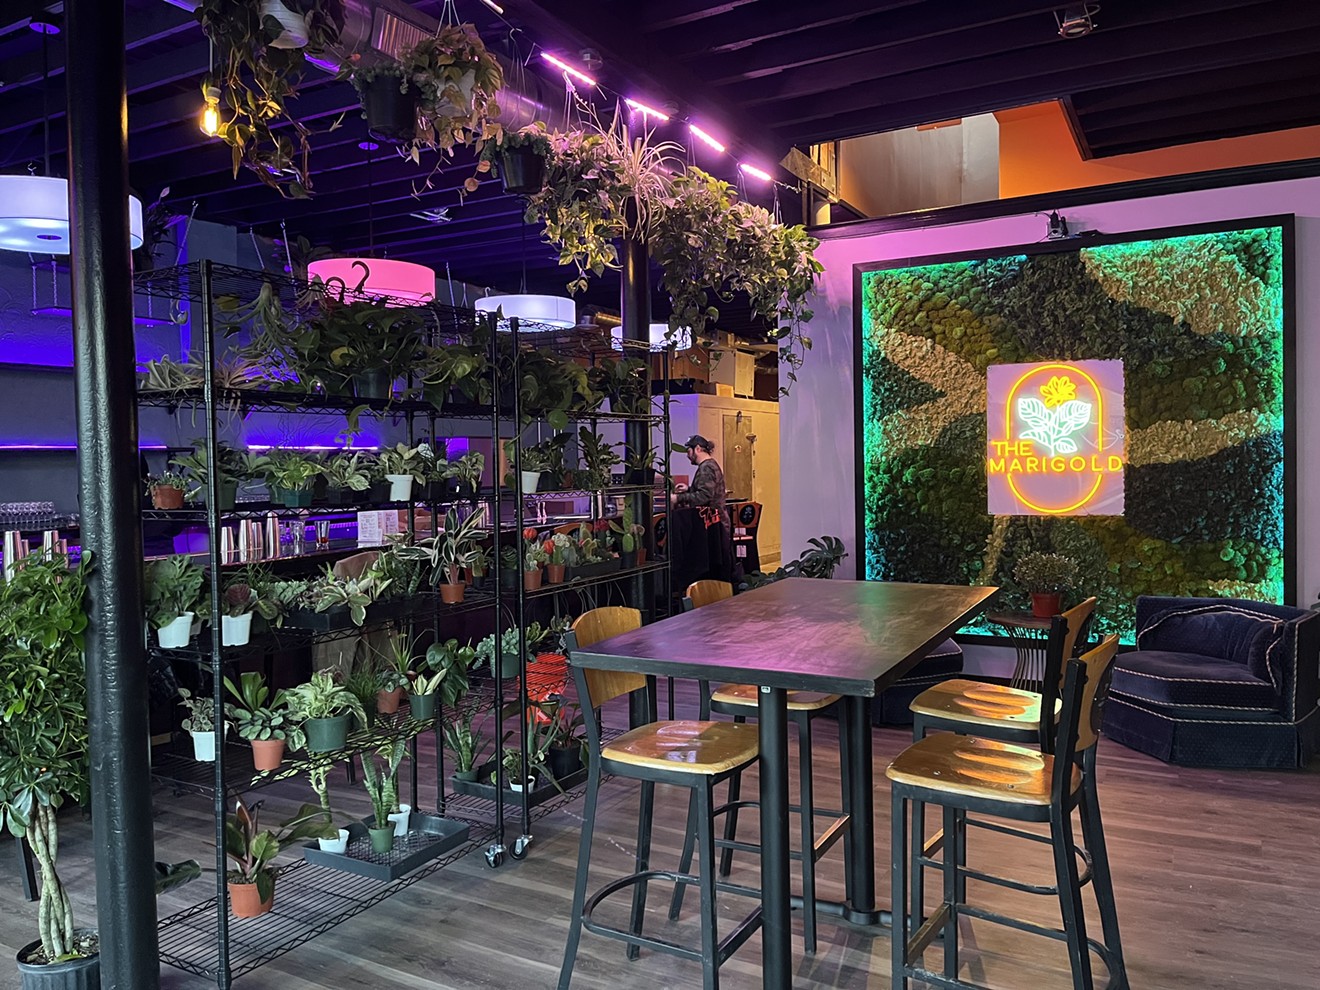 Marigold is filled with plants, including a living moss wall created by Lauren Silver.